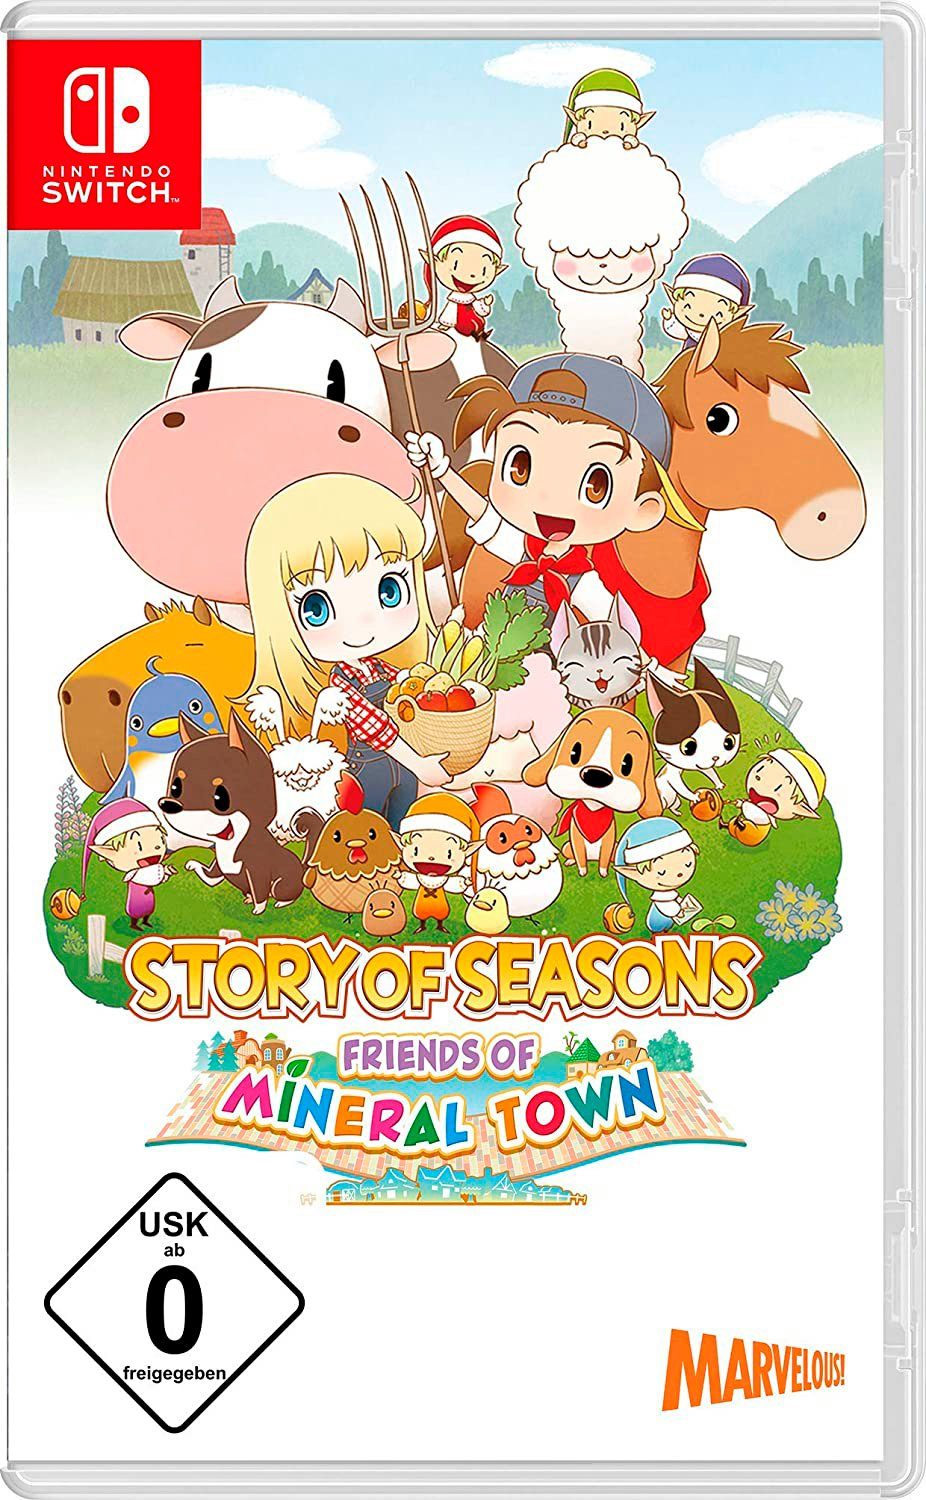 Story Of Town Seasons: Switch Friends Of Nintendo Mineral